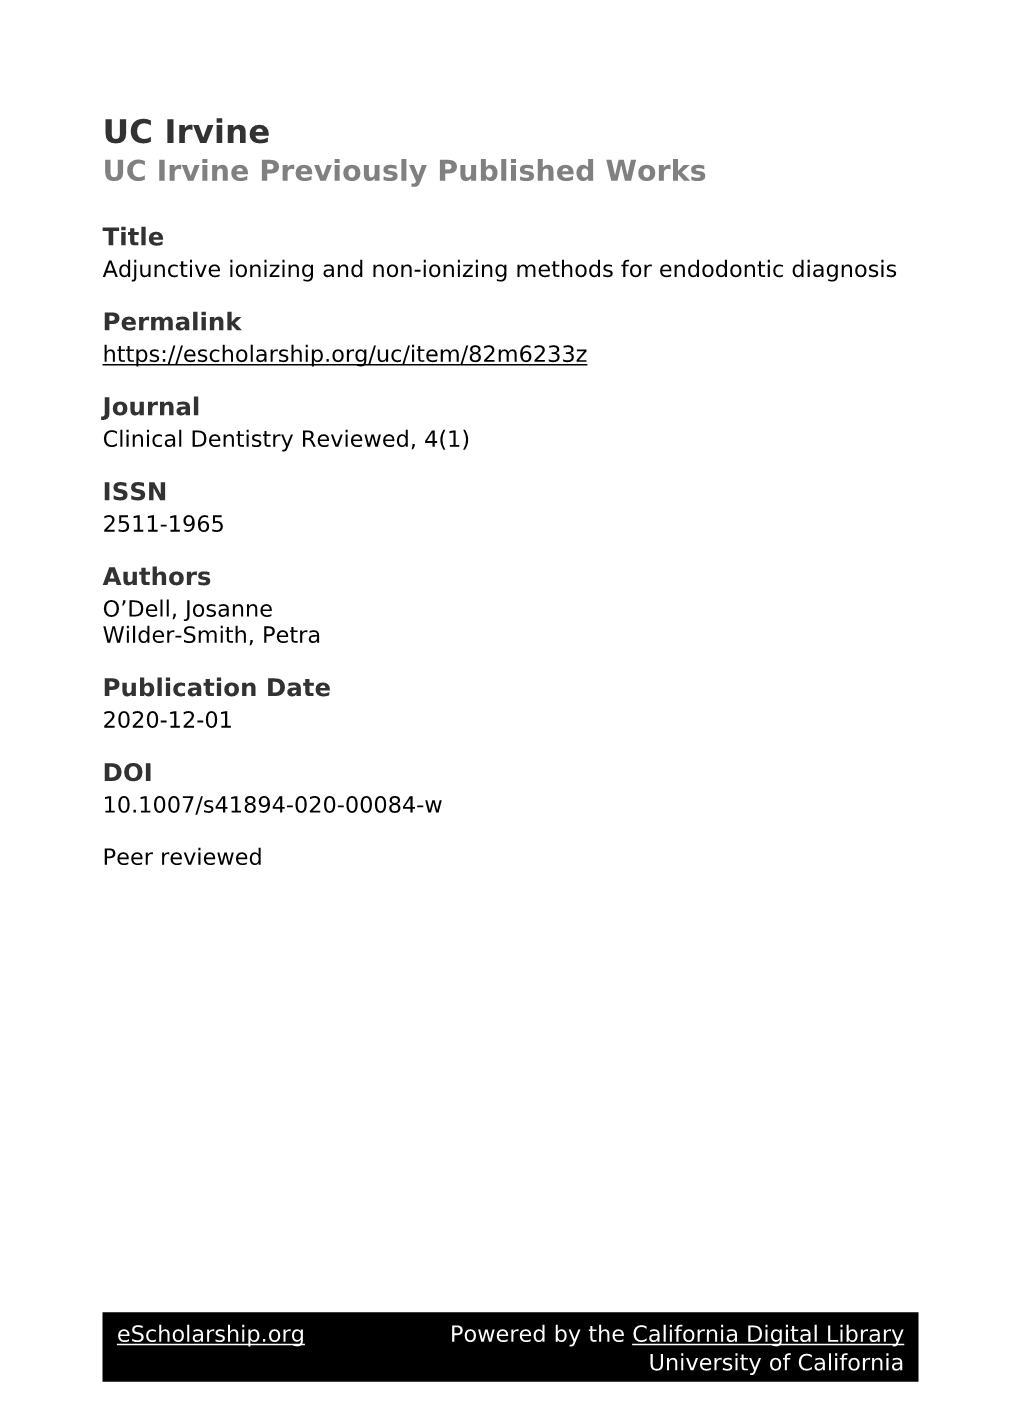 Adjunctive Ionizing and Non-Ionizing Methods for Endodontic Diagnosis